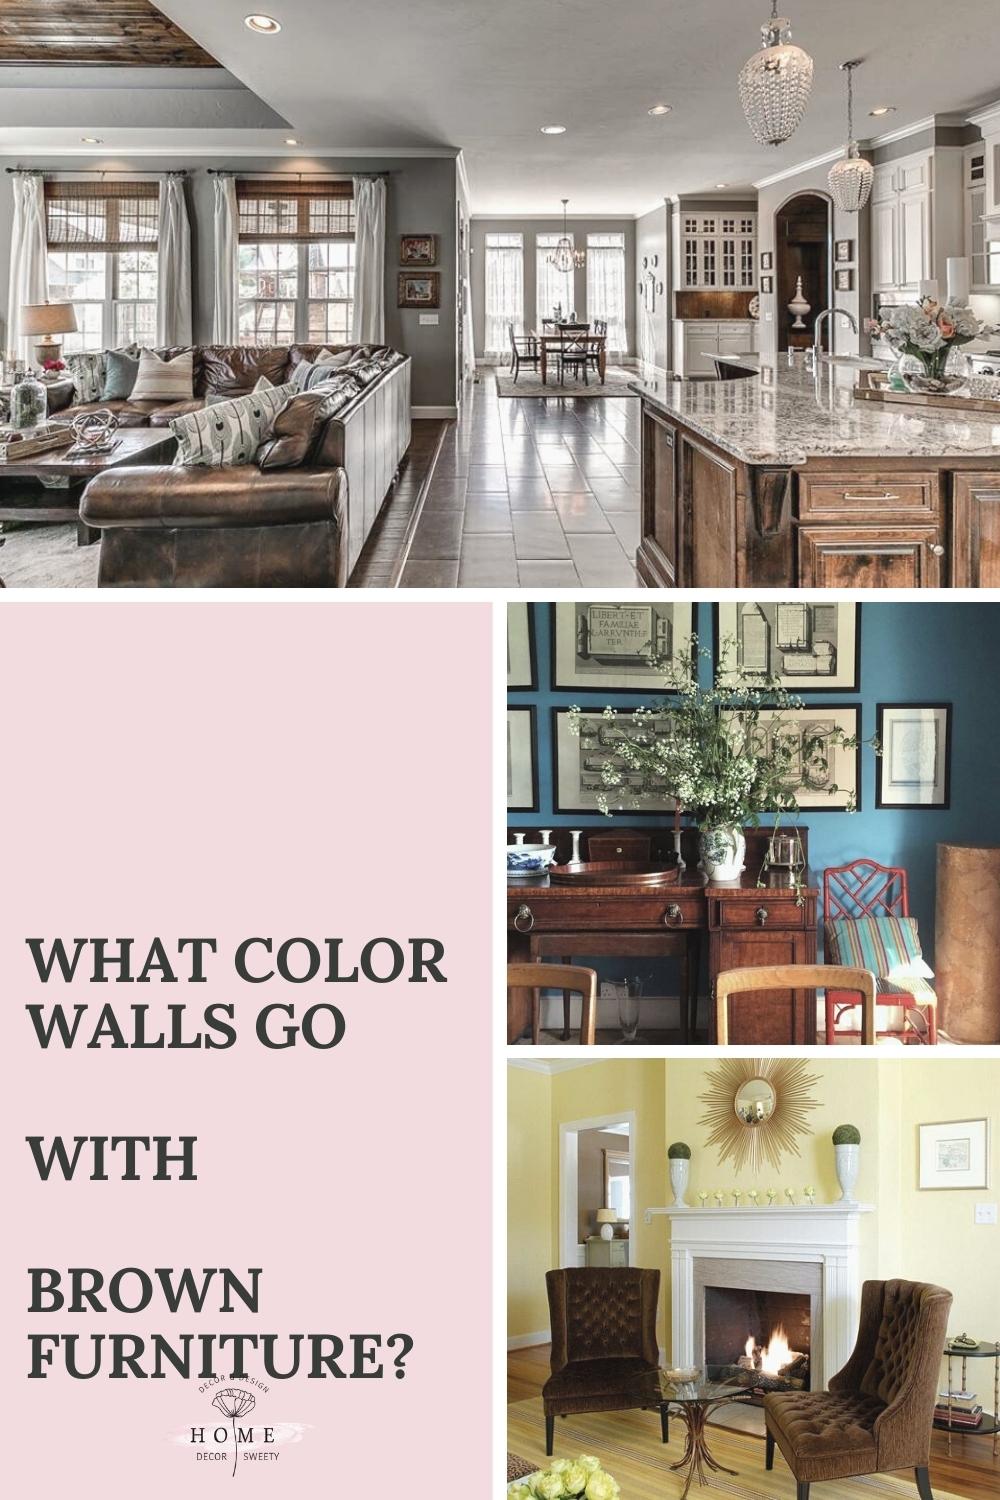 What color walls go with brown furniture